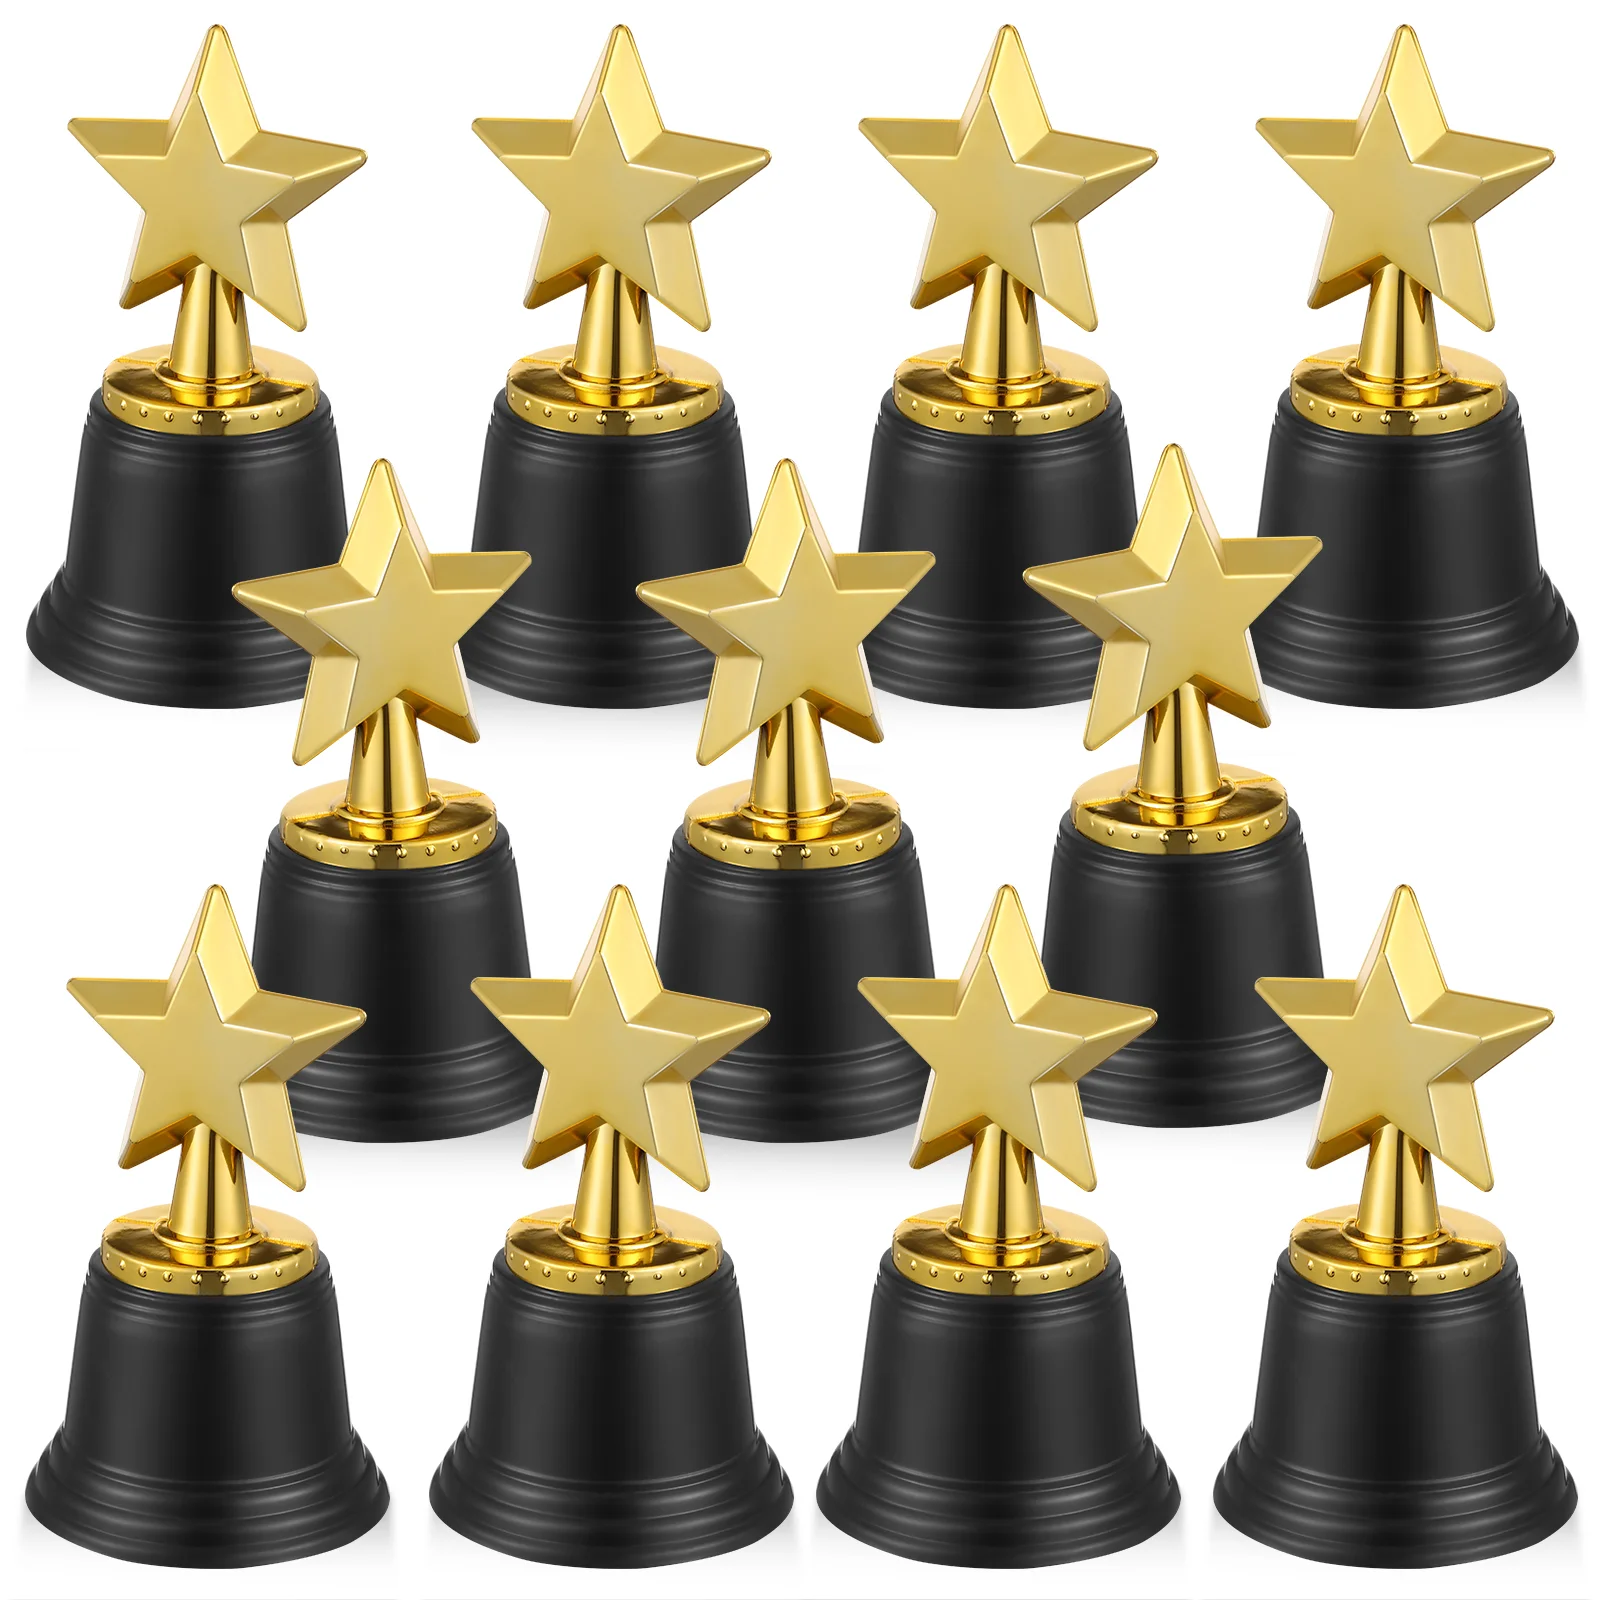 

Trophy Kids Award Trophies Party Star Awards Five Cup Point Mini Sports Prize Plastic Gold Cups Decor Toy Winning Medals Trophie